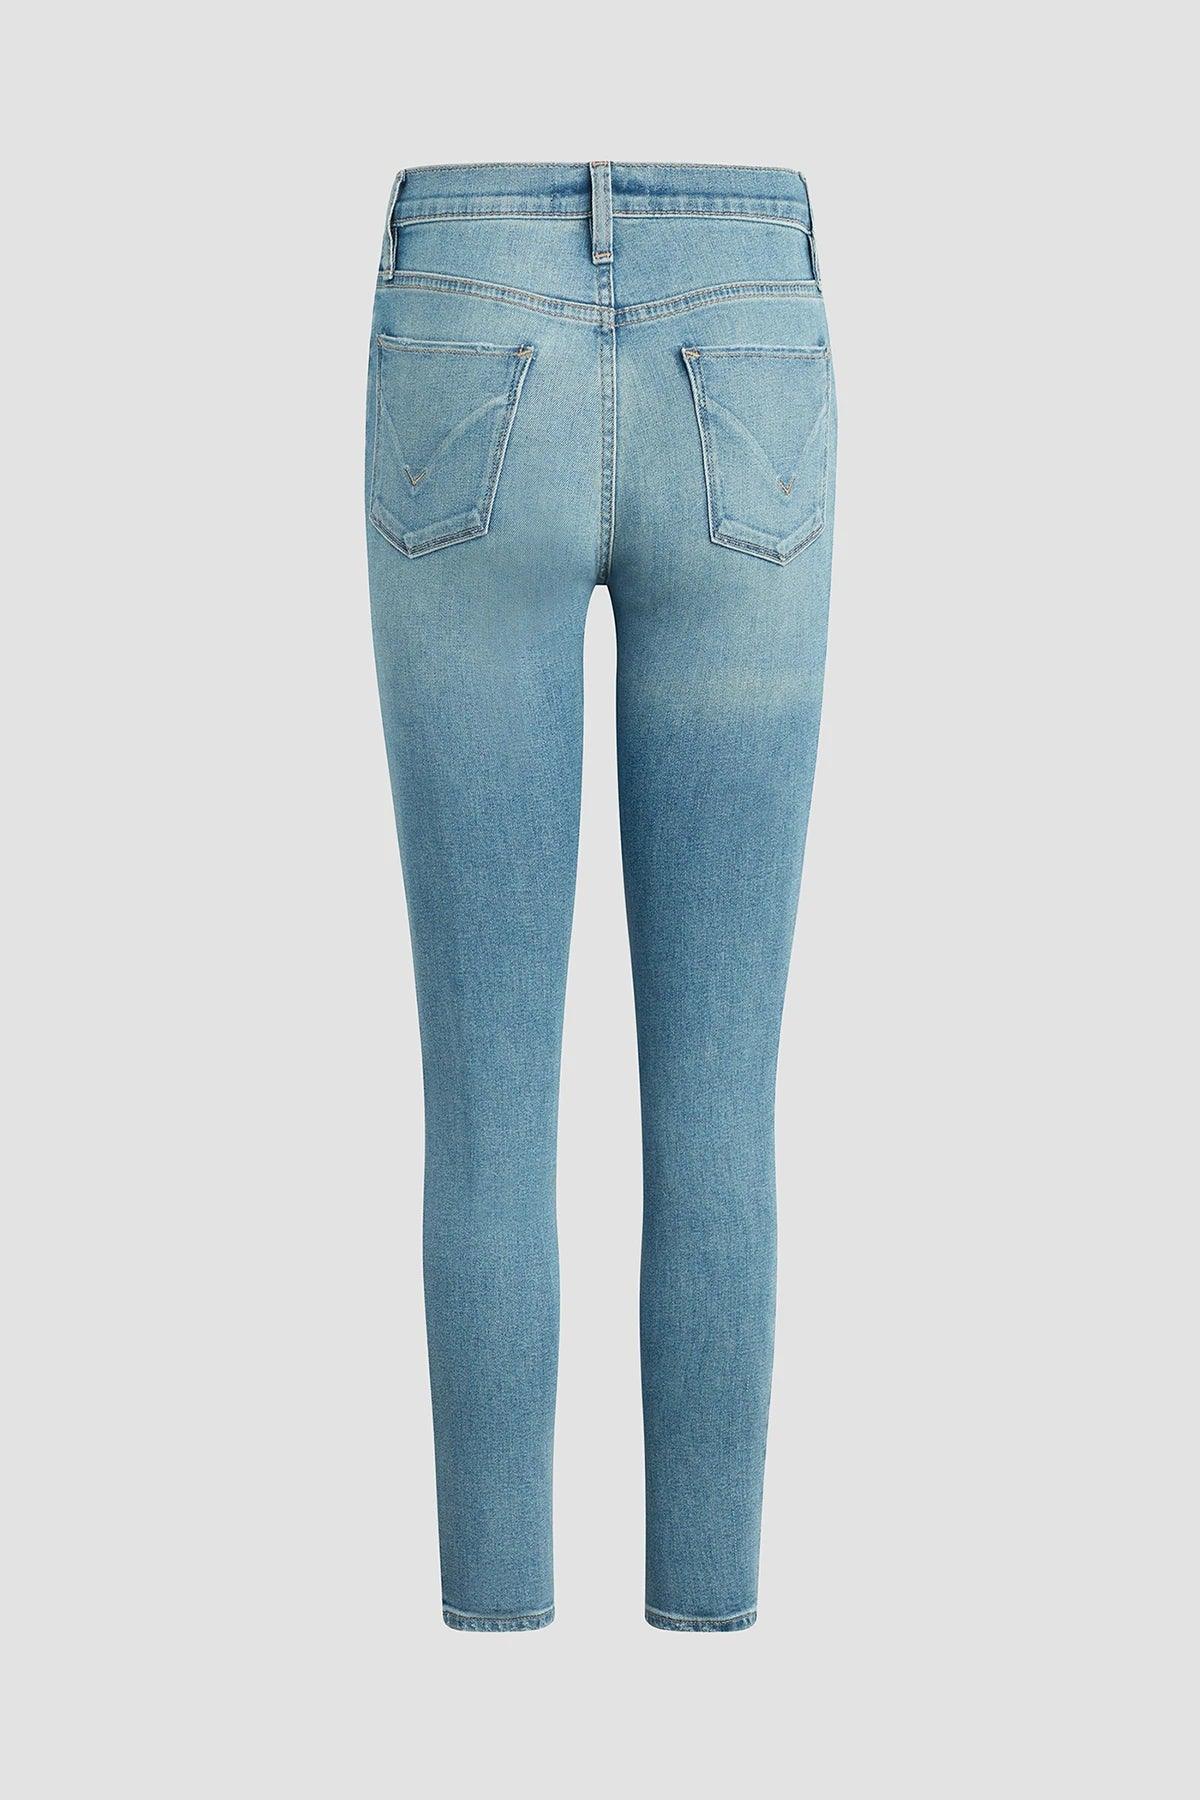 Barbara High Rise Super Skinny Ankle Jeans by Hudson - Haven